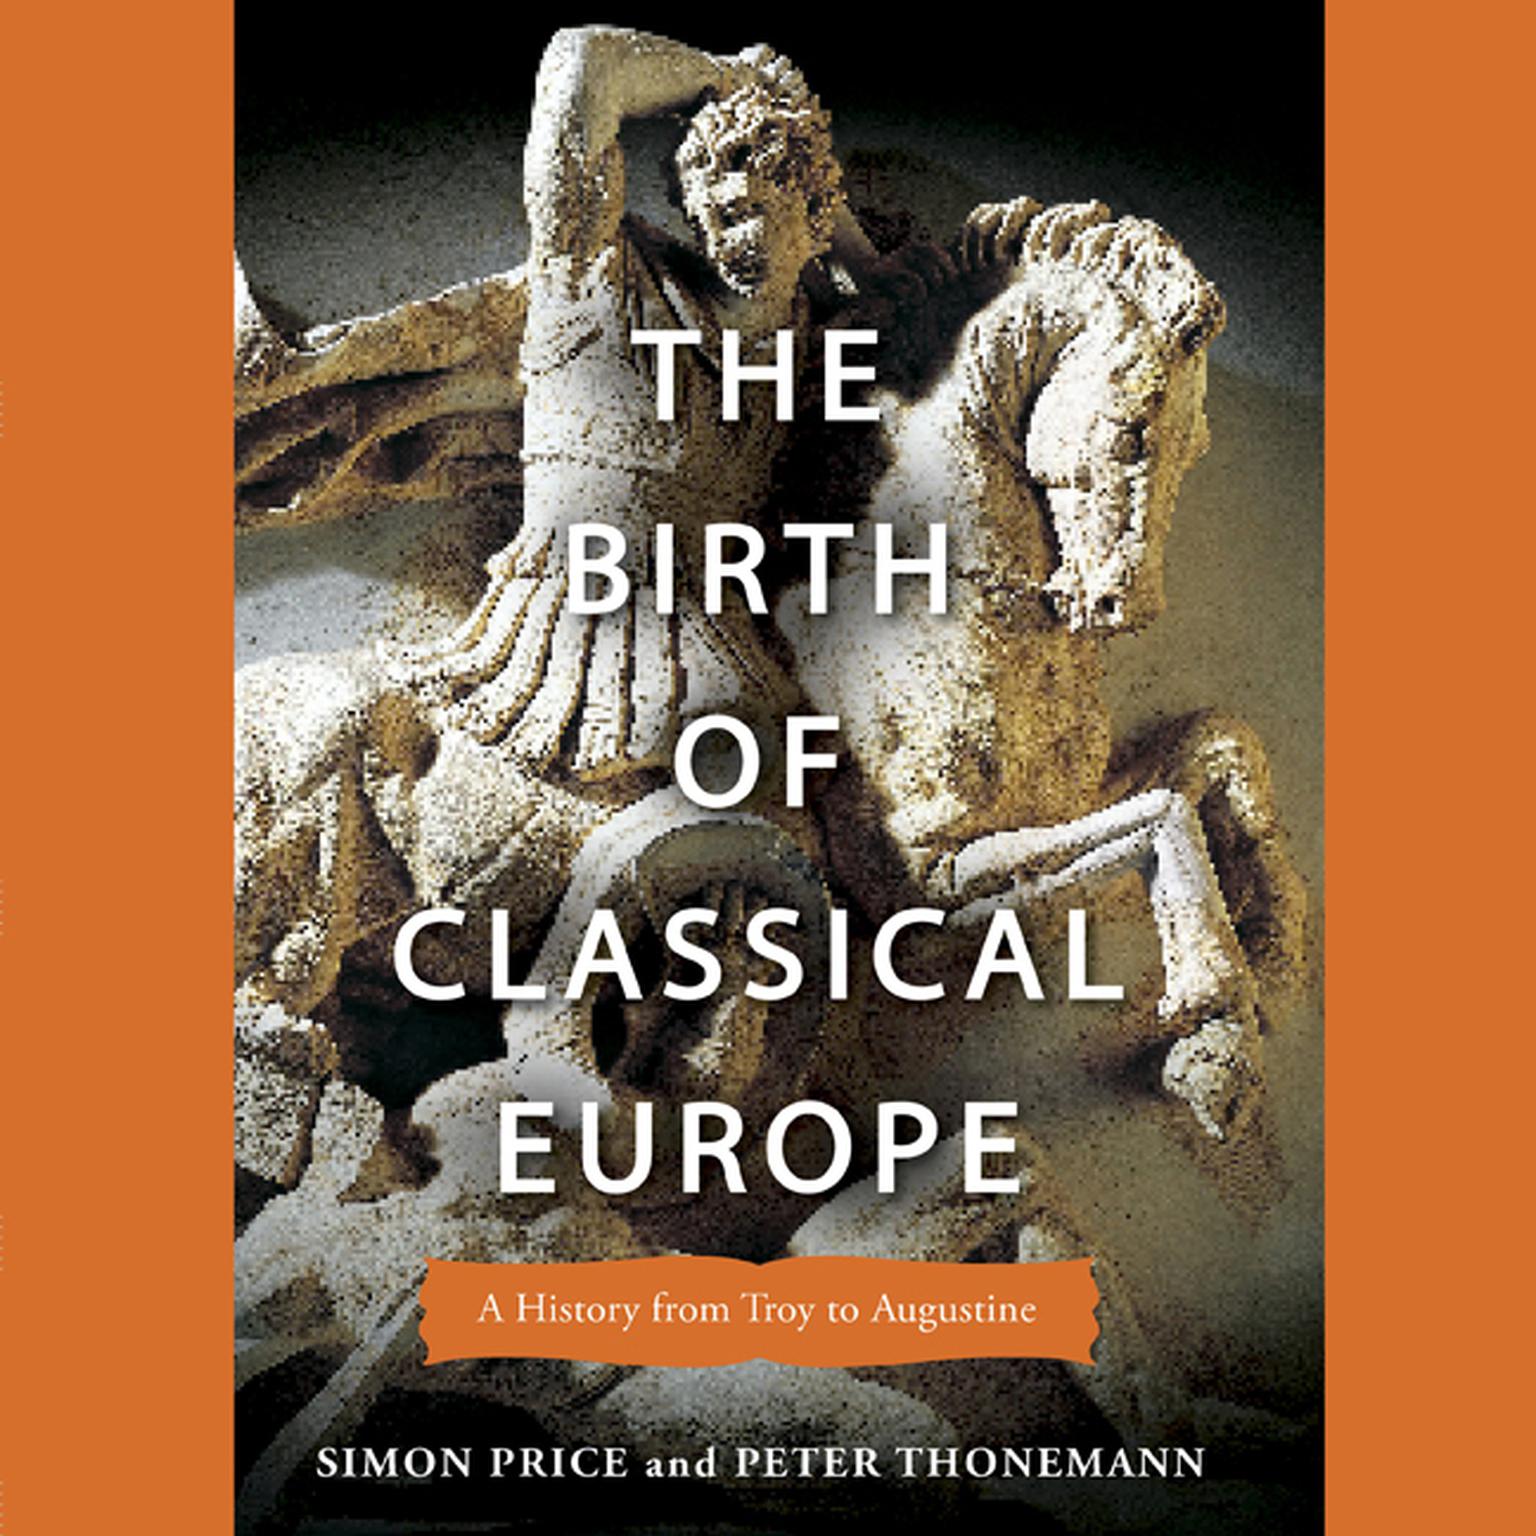 The Birth of Classical Europe: A History From Troy to Augustine Audiobook, by Simon Price